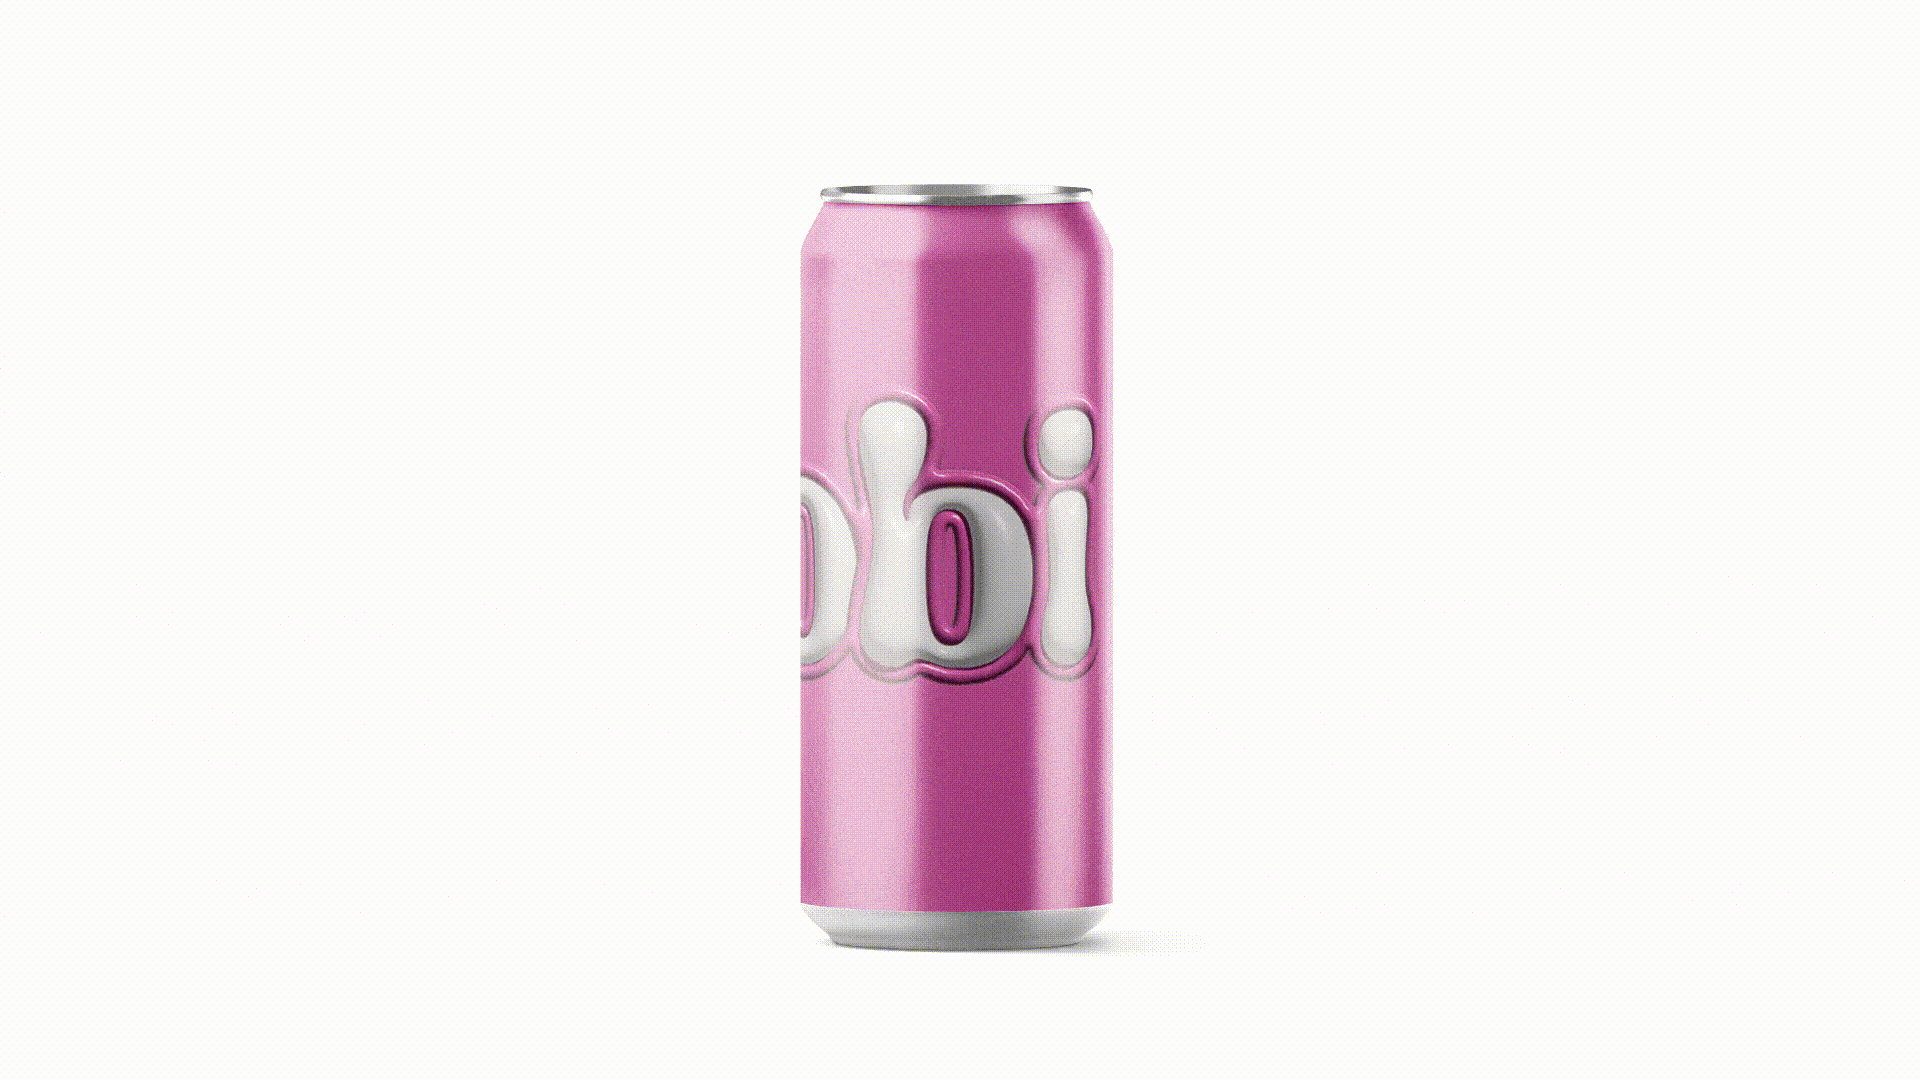 A Soda can with a design that says Soobi in 3D text.